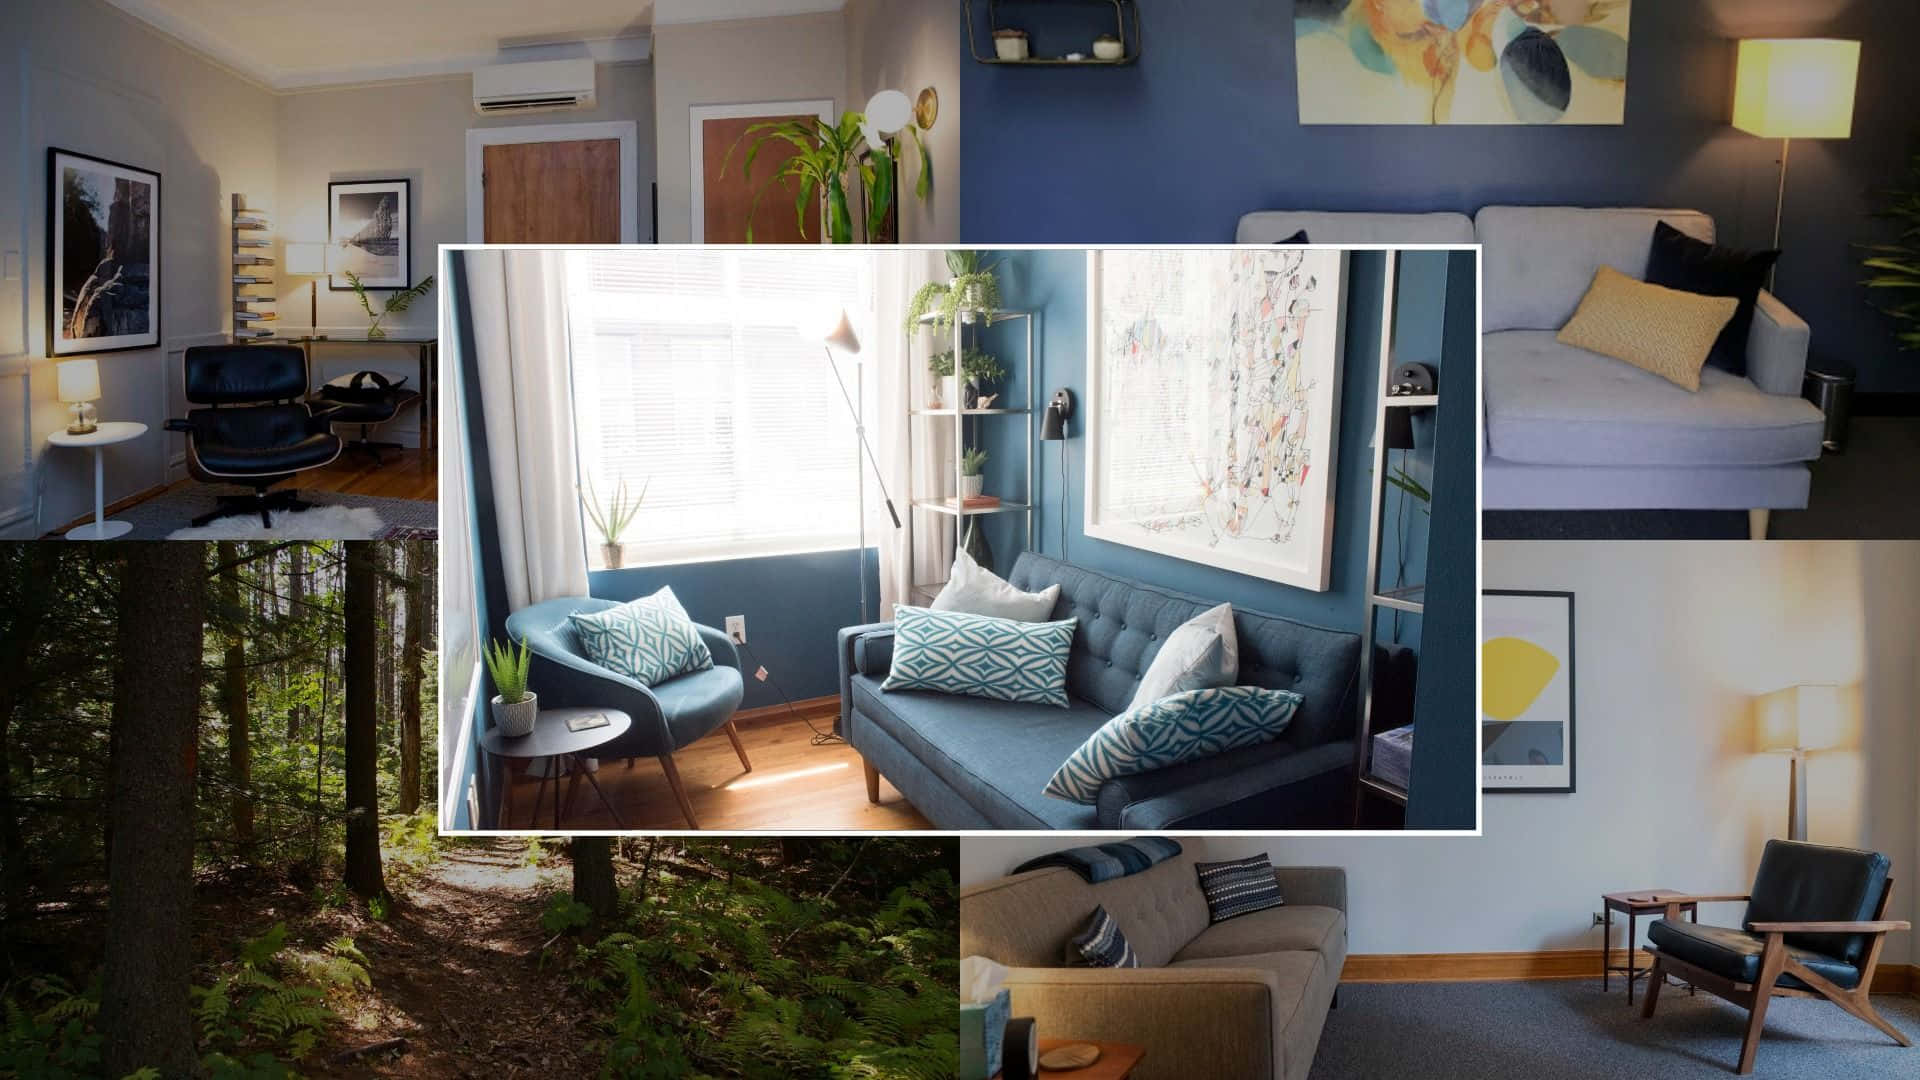 A Collage Of Photos Of A Living Room With Blue Walls